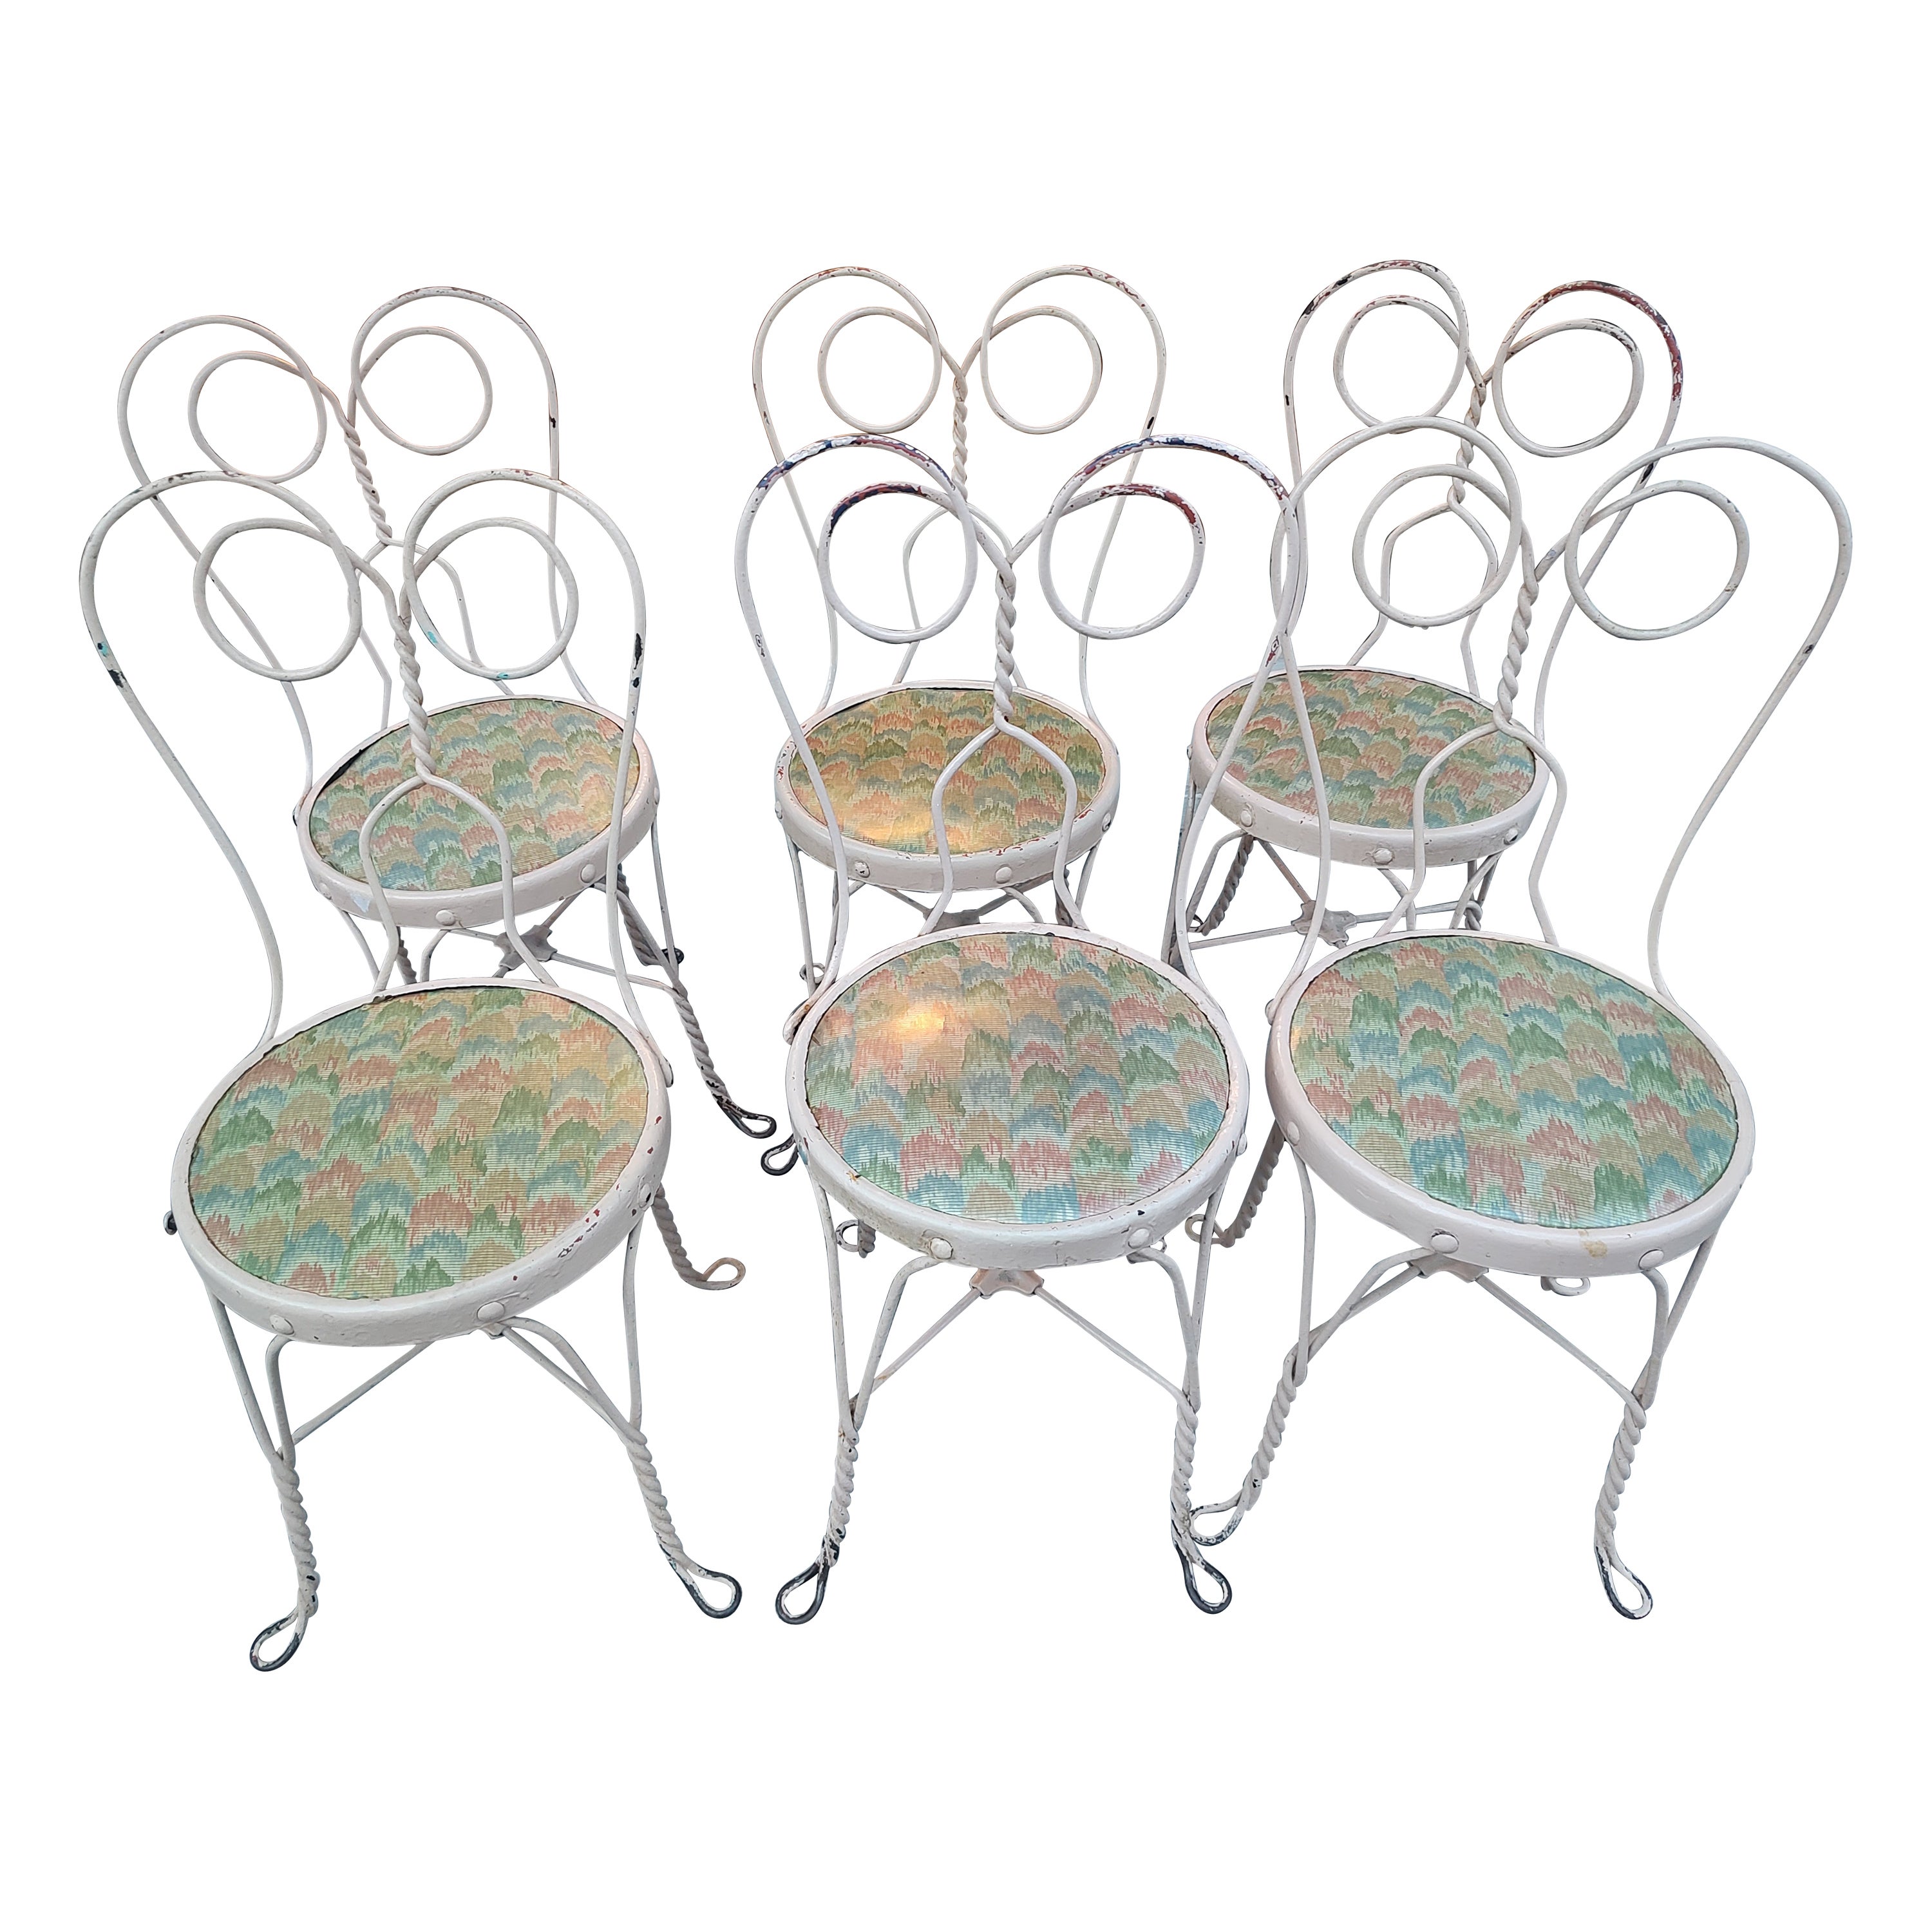 Great set of 6 ice cream parlor chairs from the late 19th century. Brand New hardwood plywood seats. Disregard seat pics with multiple color fabric. Many layers of paint on these beauties, called Owl Eyes because of the configuration of the circles